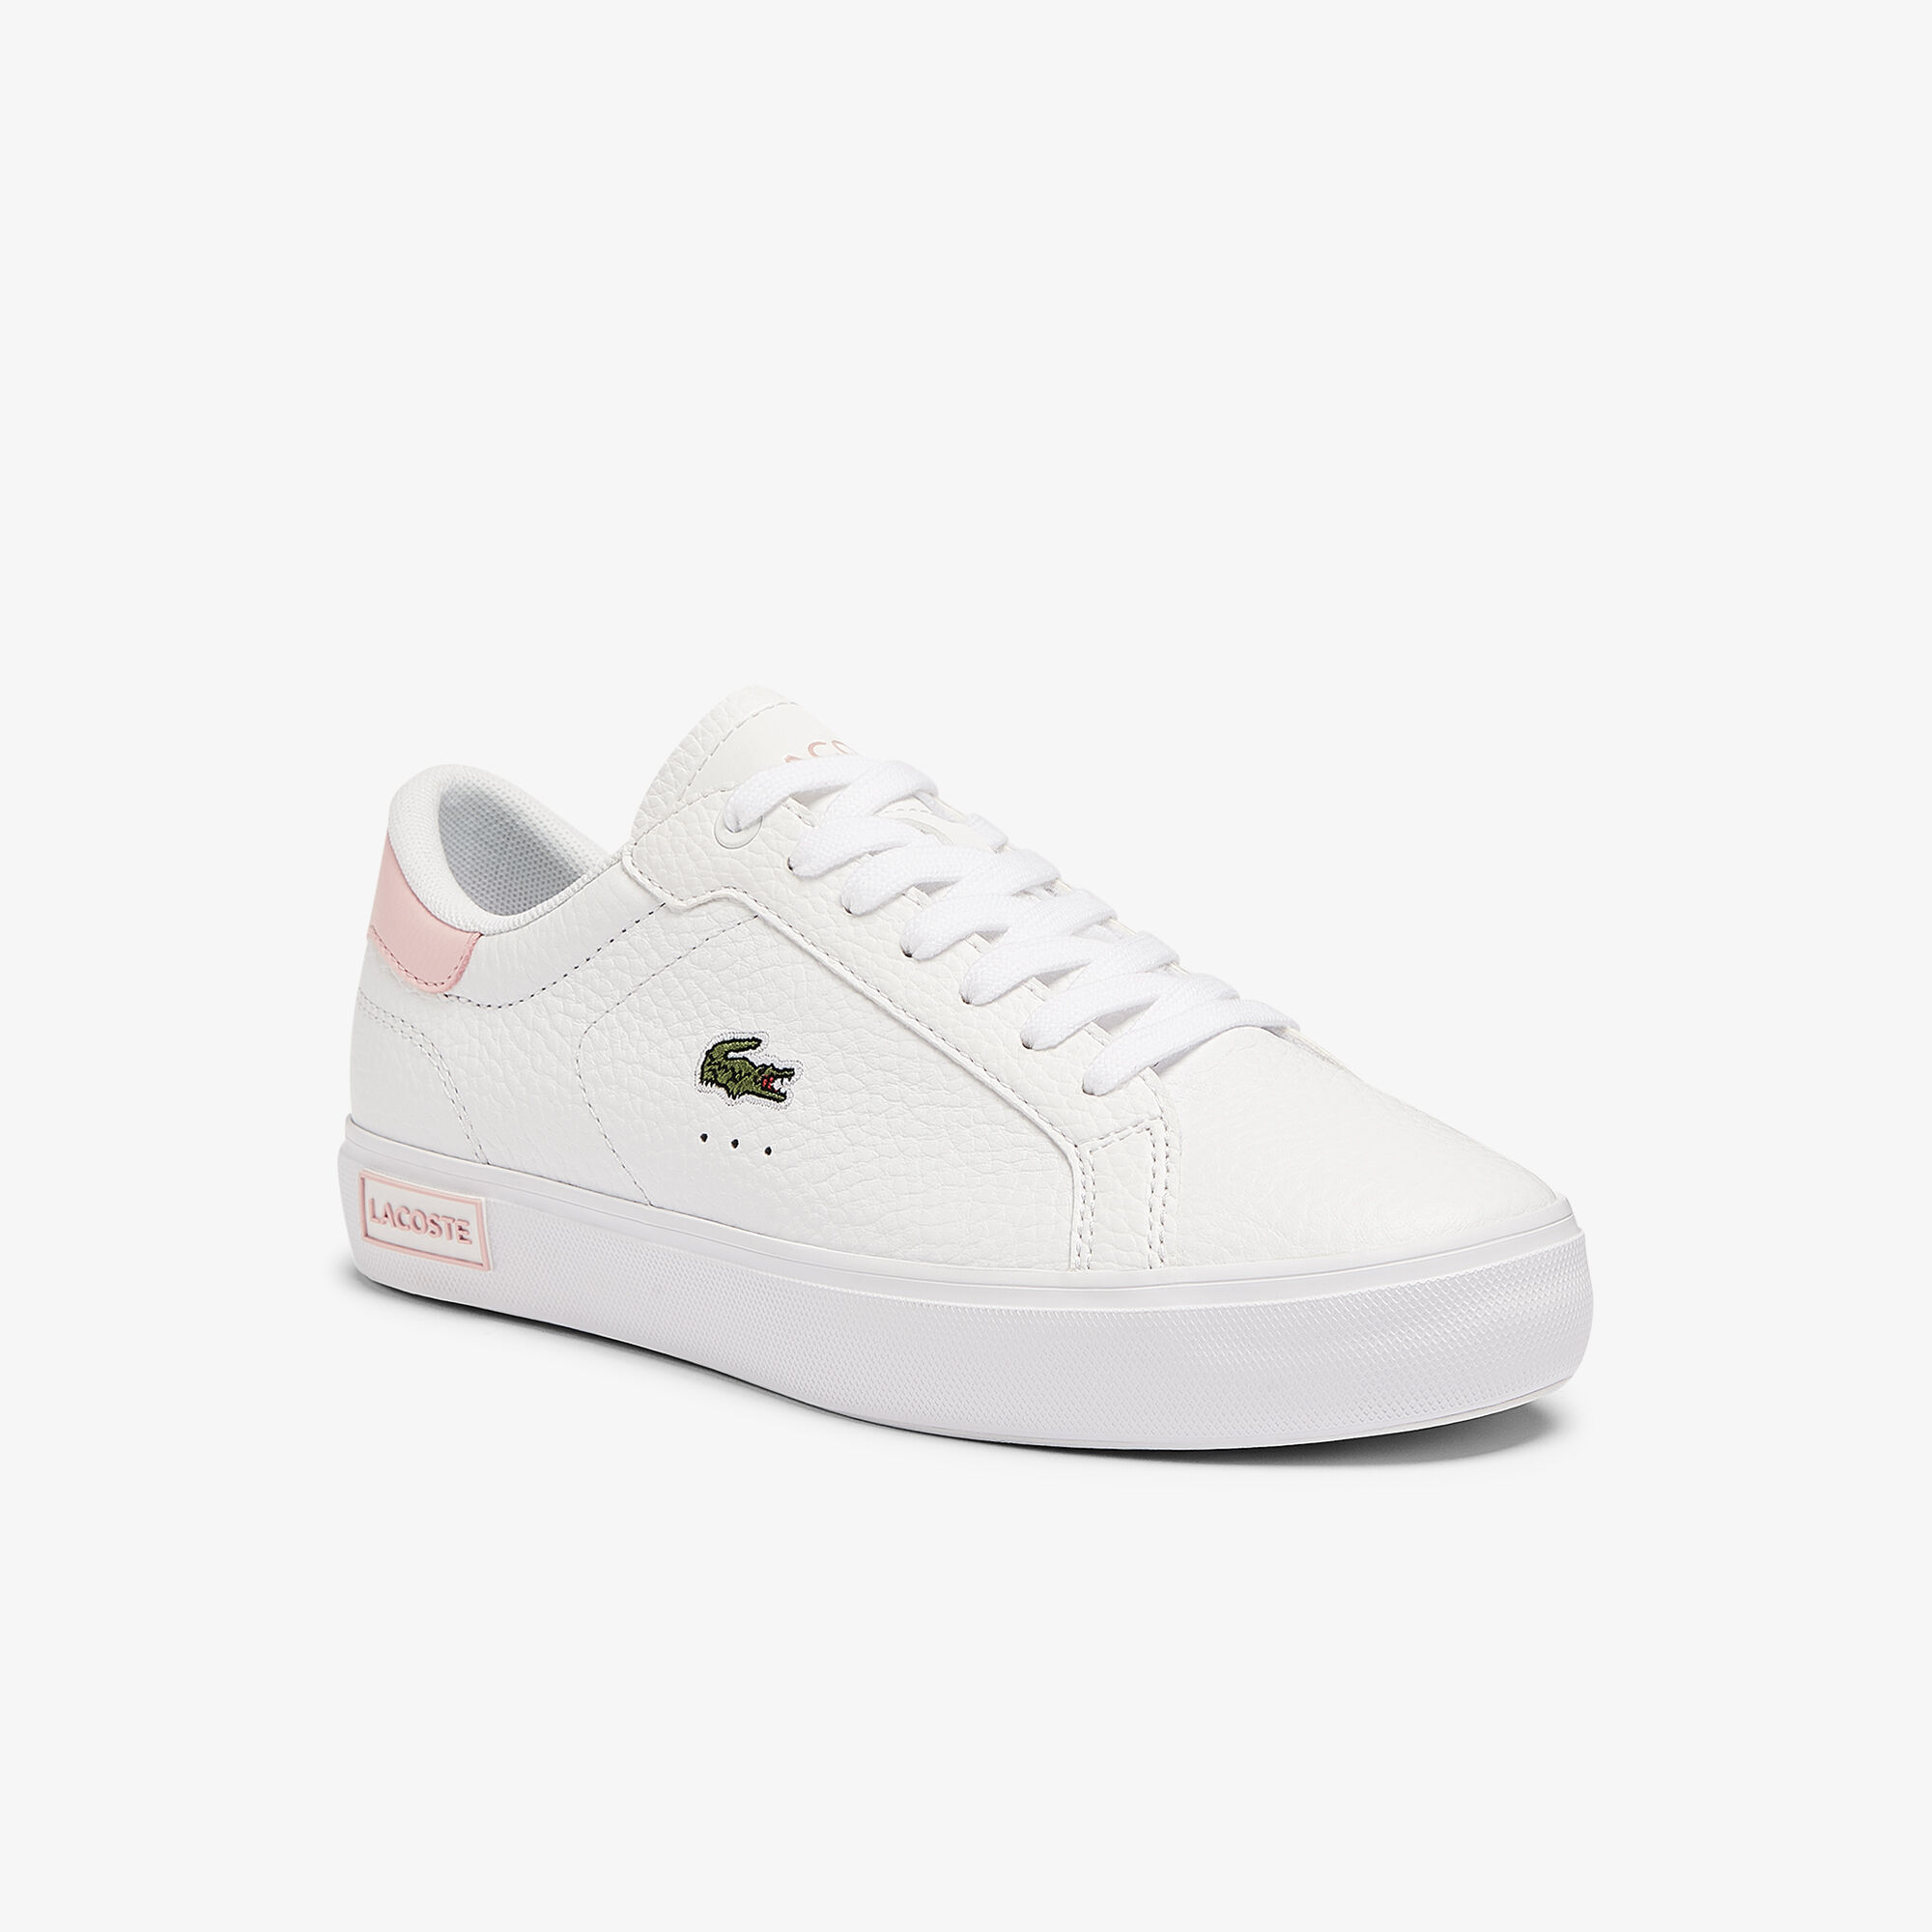 Women's Powercourt Leather and Synthetic Sneakers